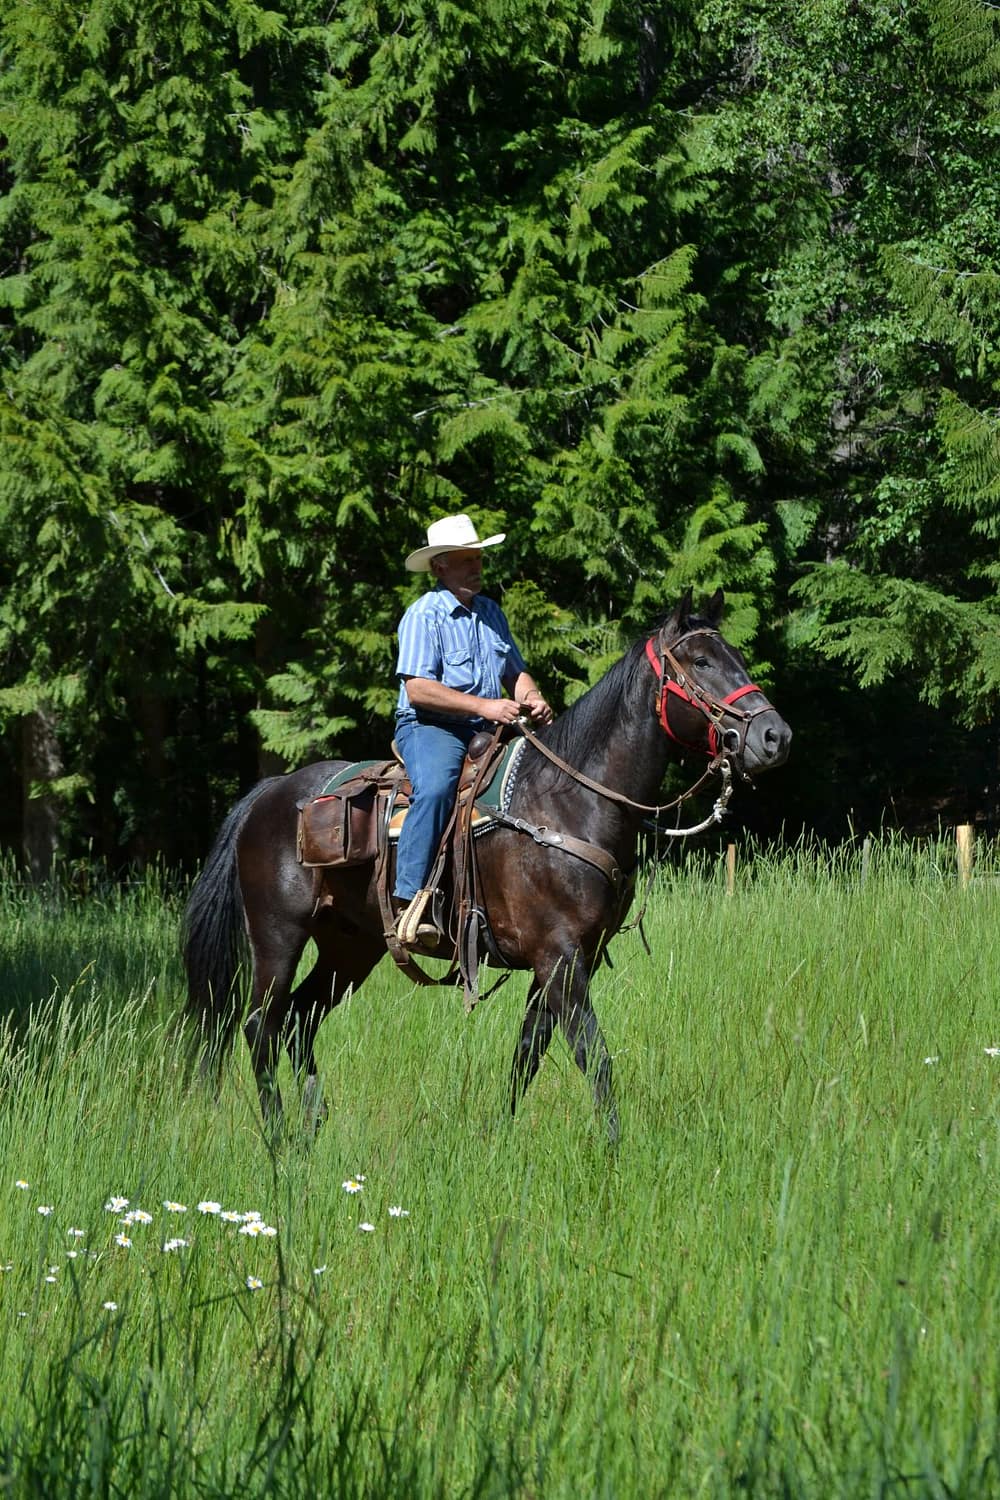 Cowboy riding black horse on a trail ride through forest and tall green grass